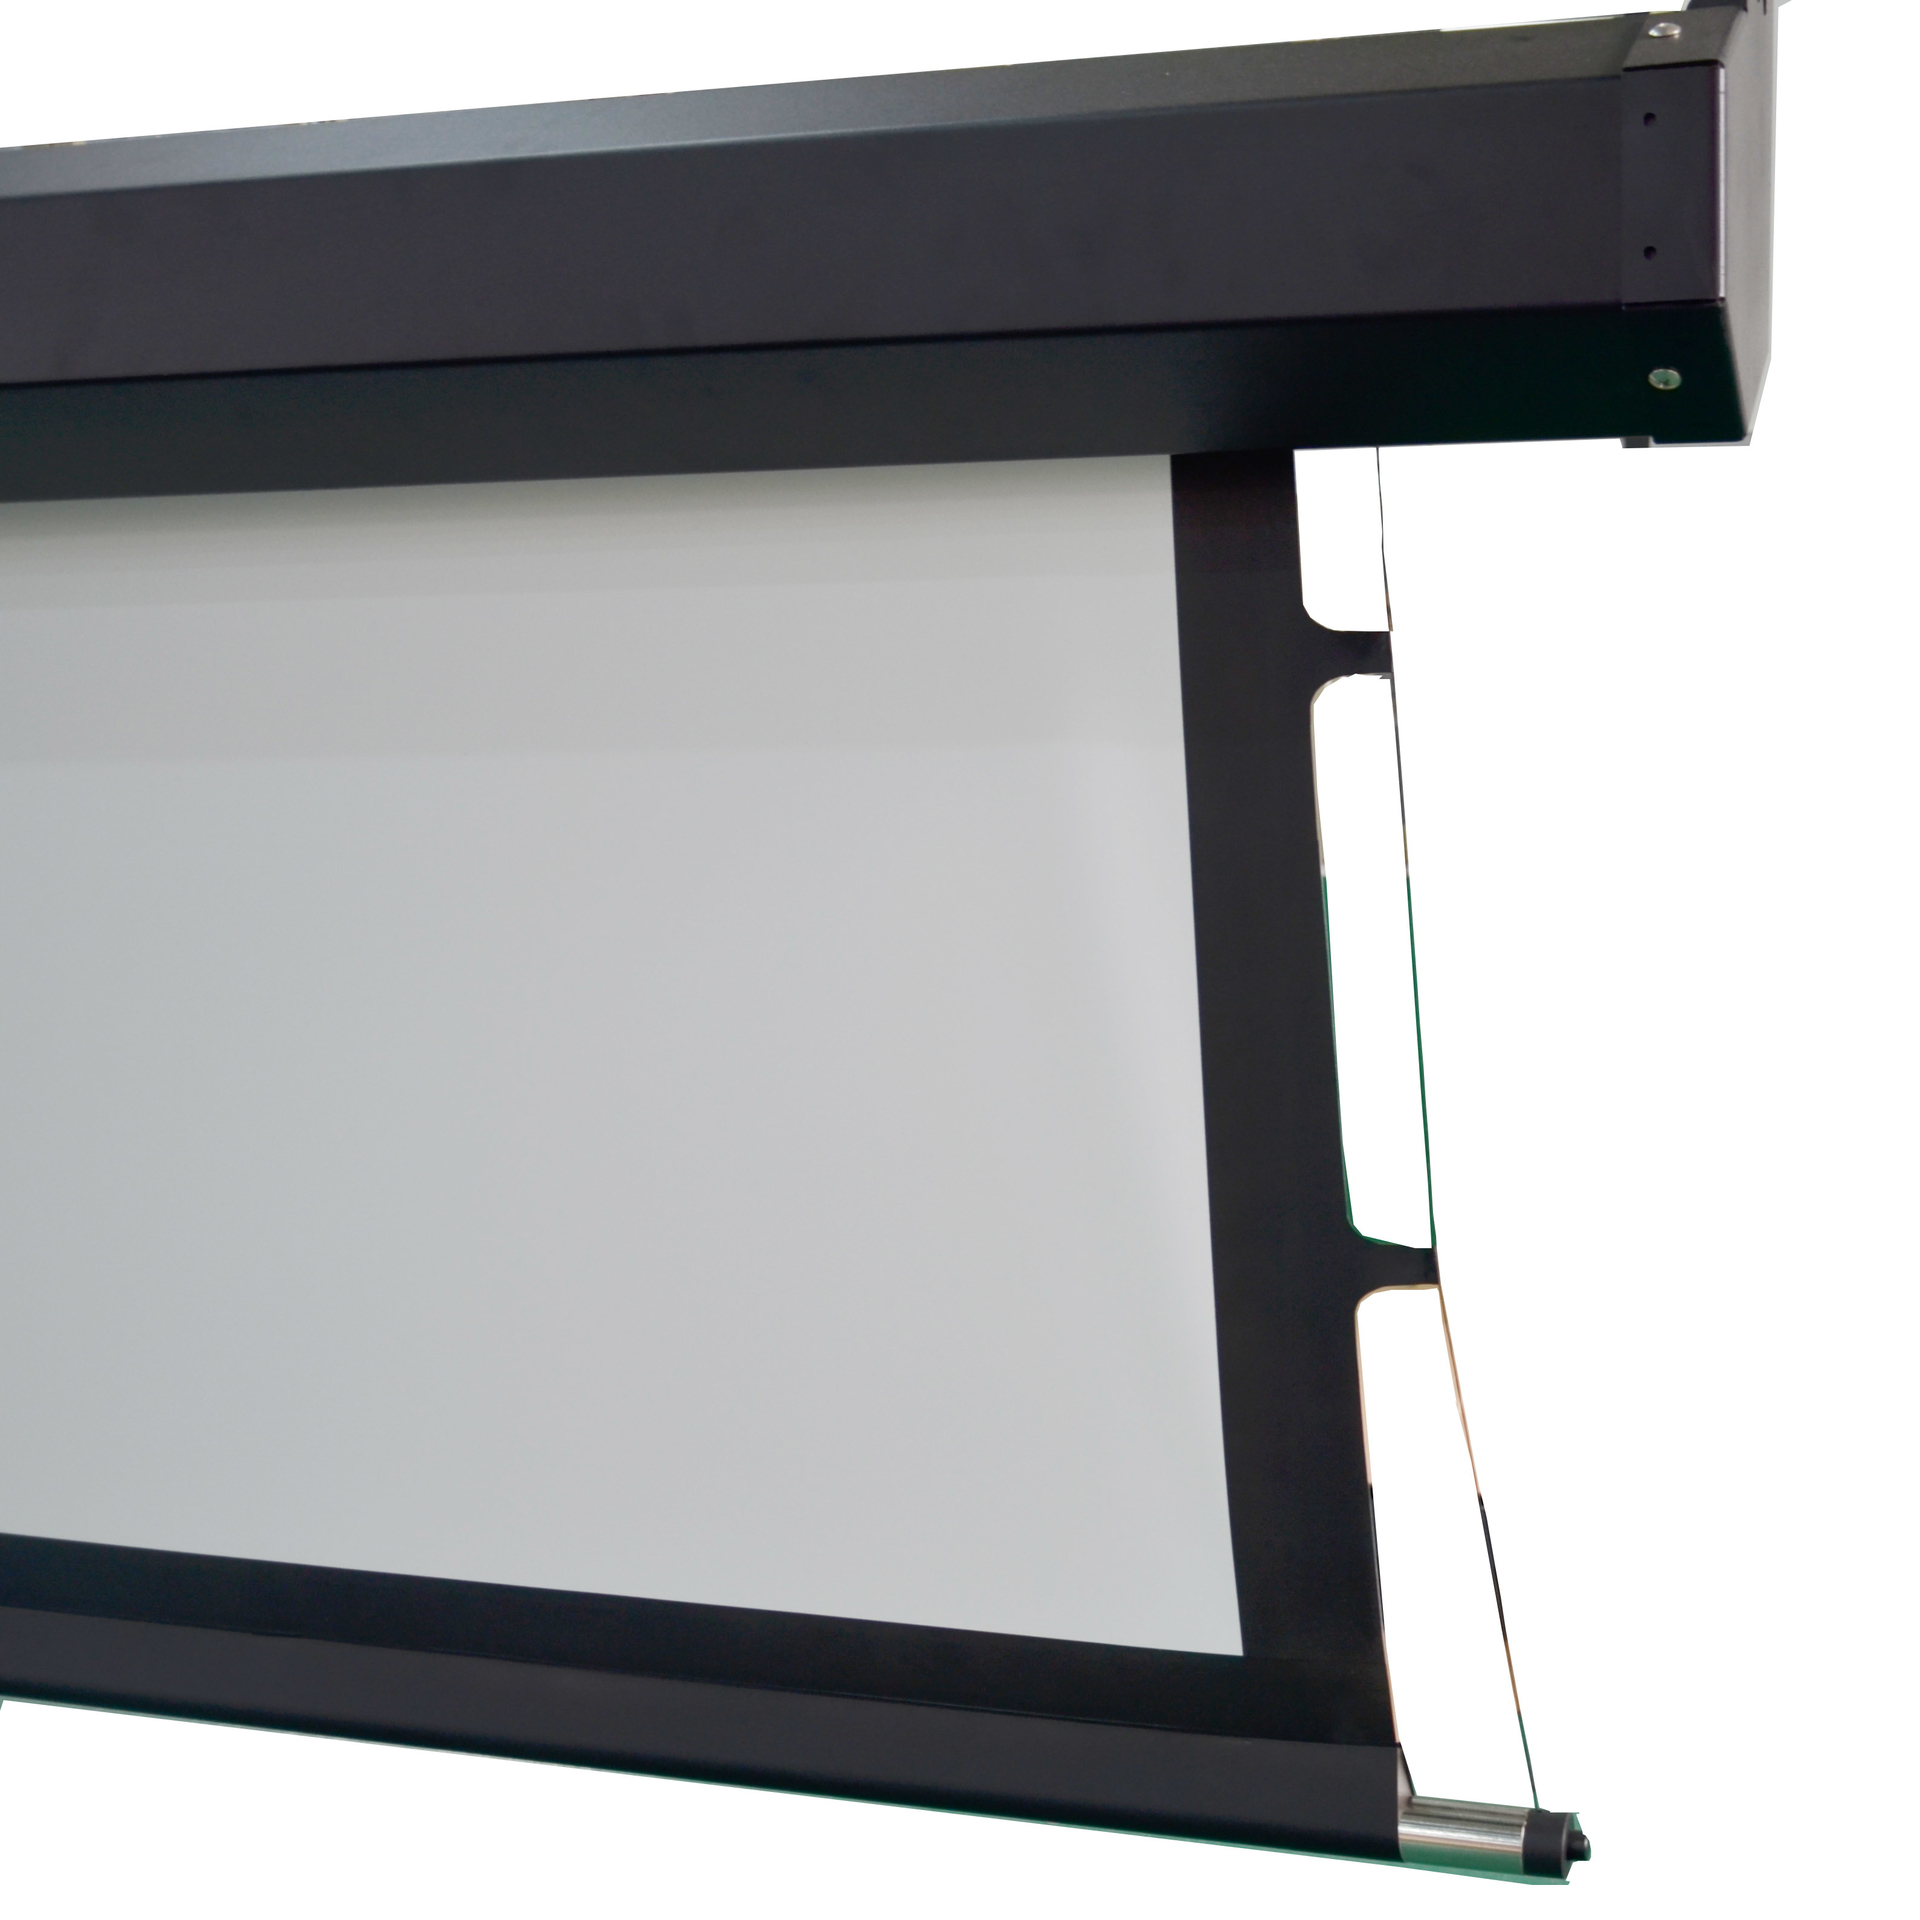 XY Screens large portable projector screen from China for PC